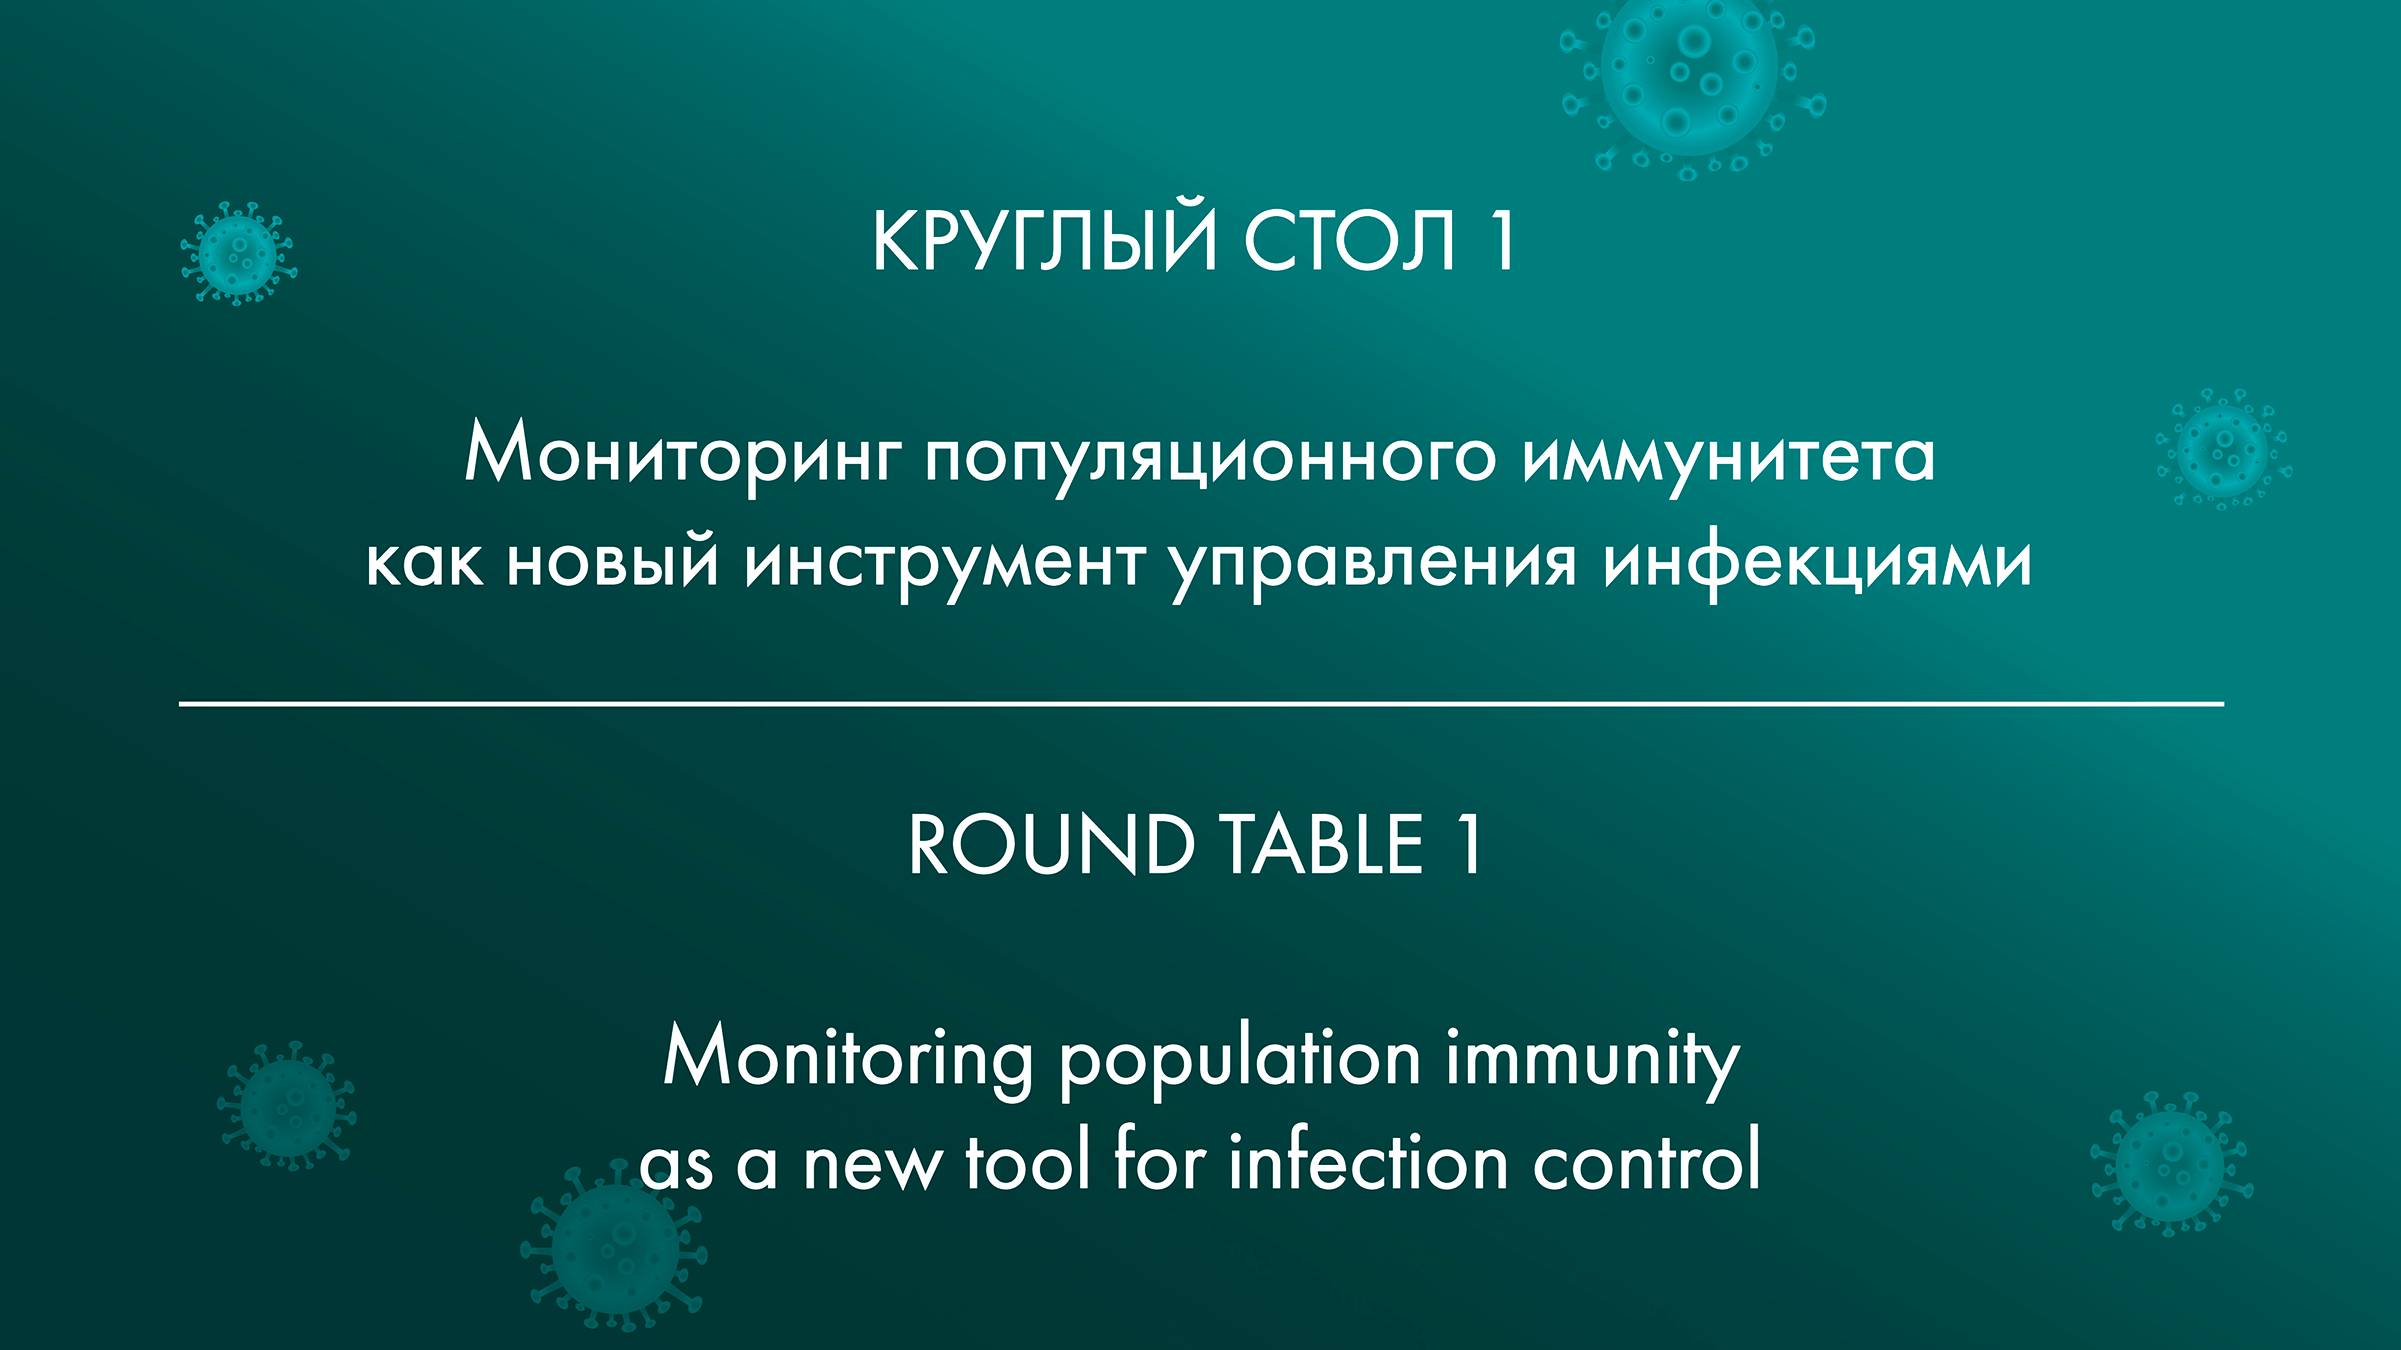 ROUND TABLE 1Monitoring population immunity as a new tool for infection control